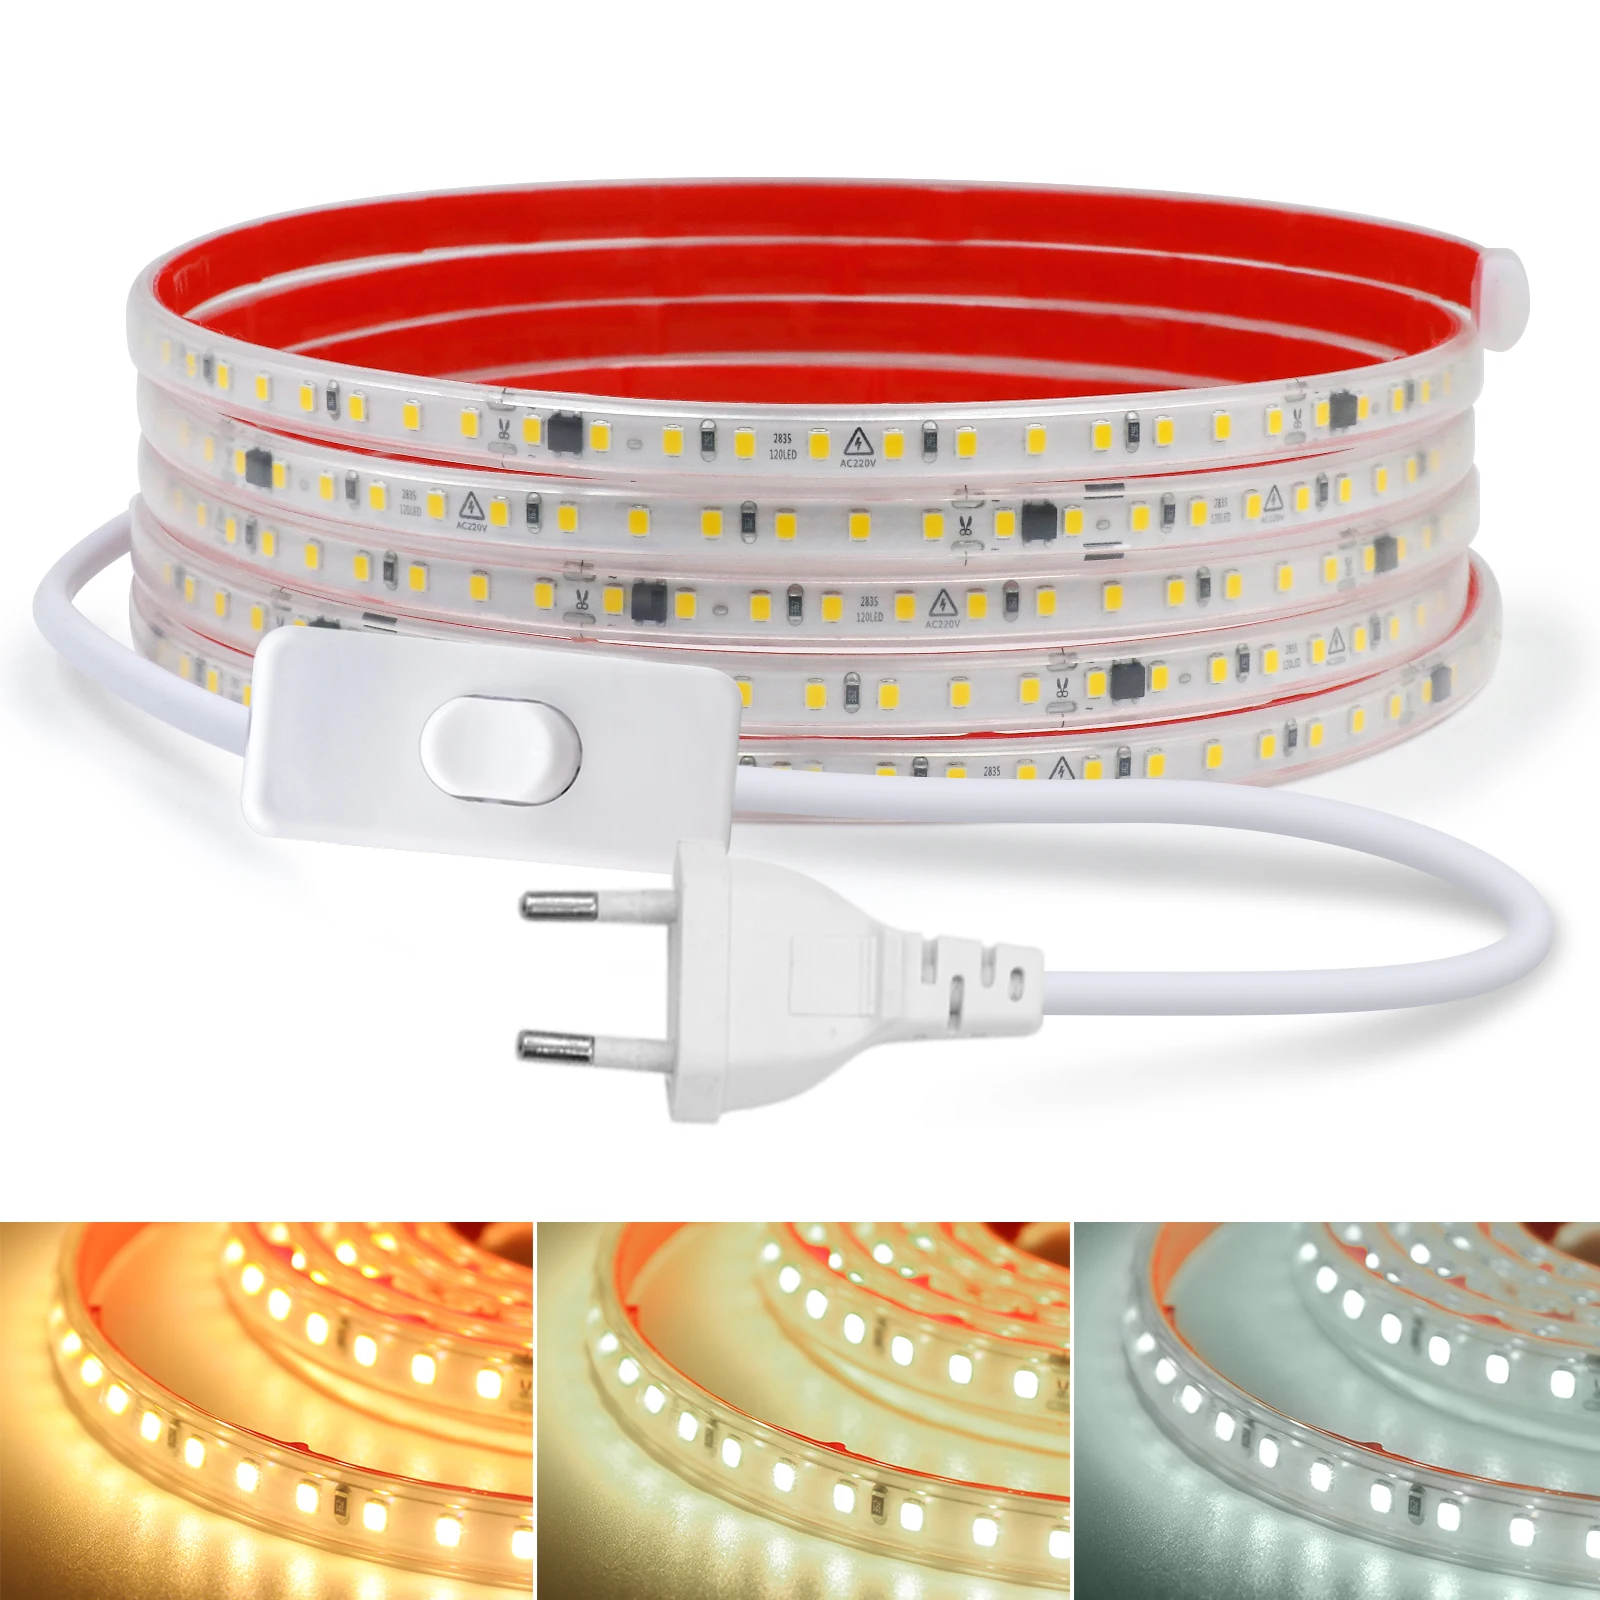 

10cm Cuttable LED Strip Light with IC 220V Dimmable 2835 120LEDs Flexible LED Tape Ribbon Waterproof Stripe Lamp Adhesive Tape